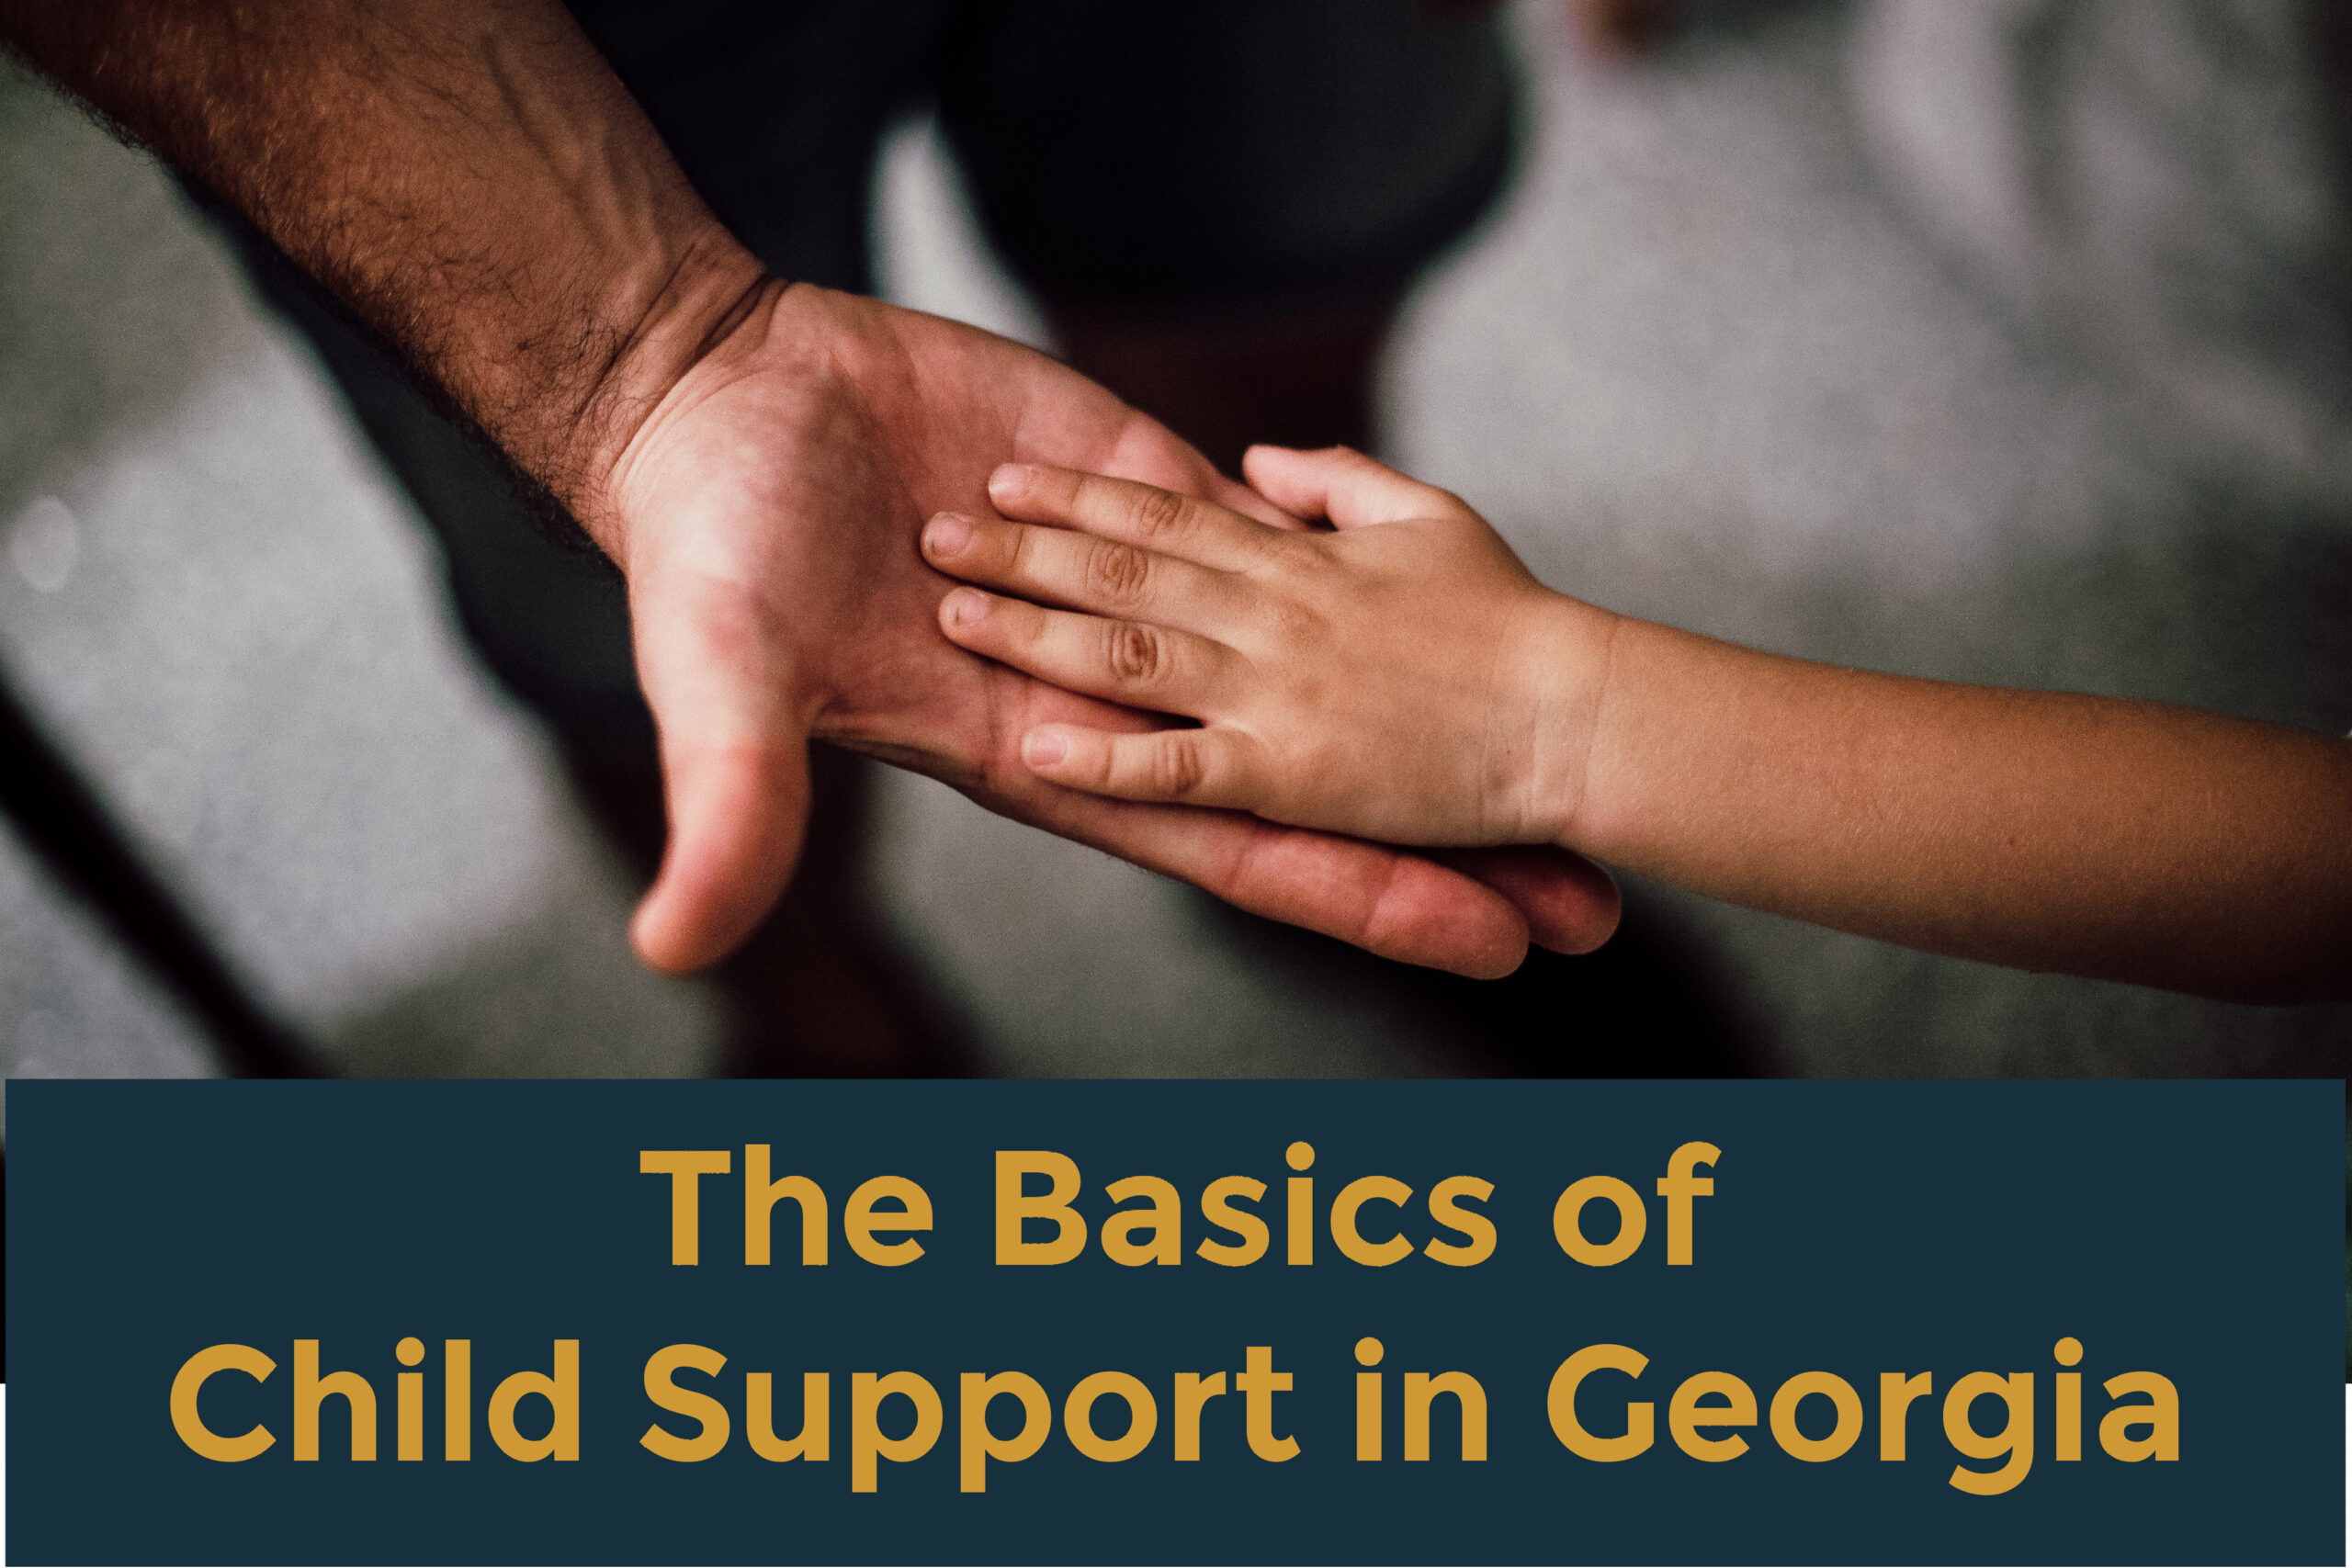 The Basics of Child Support in Georgia